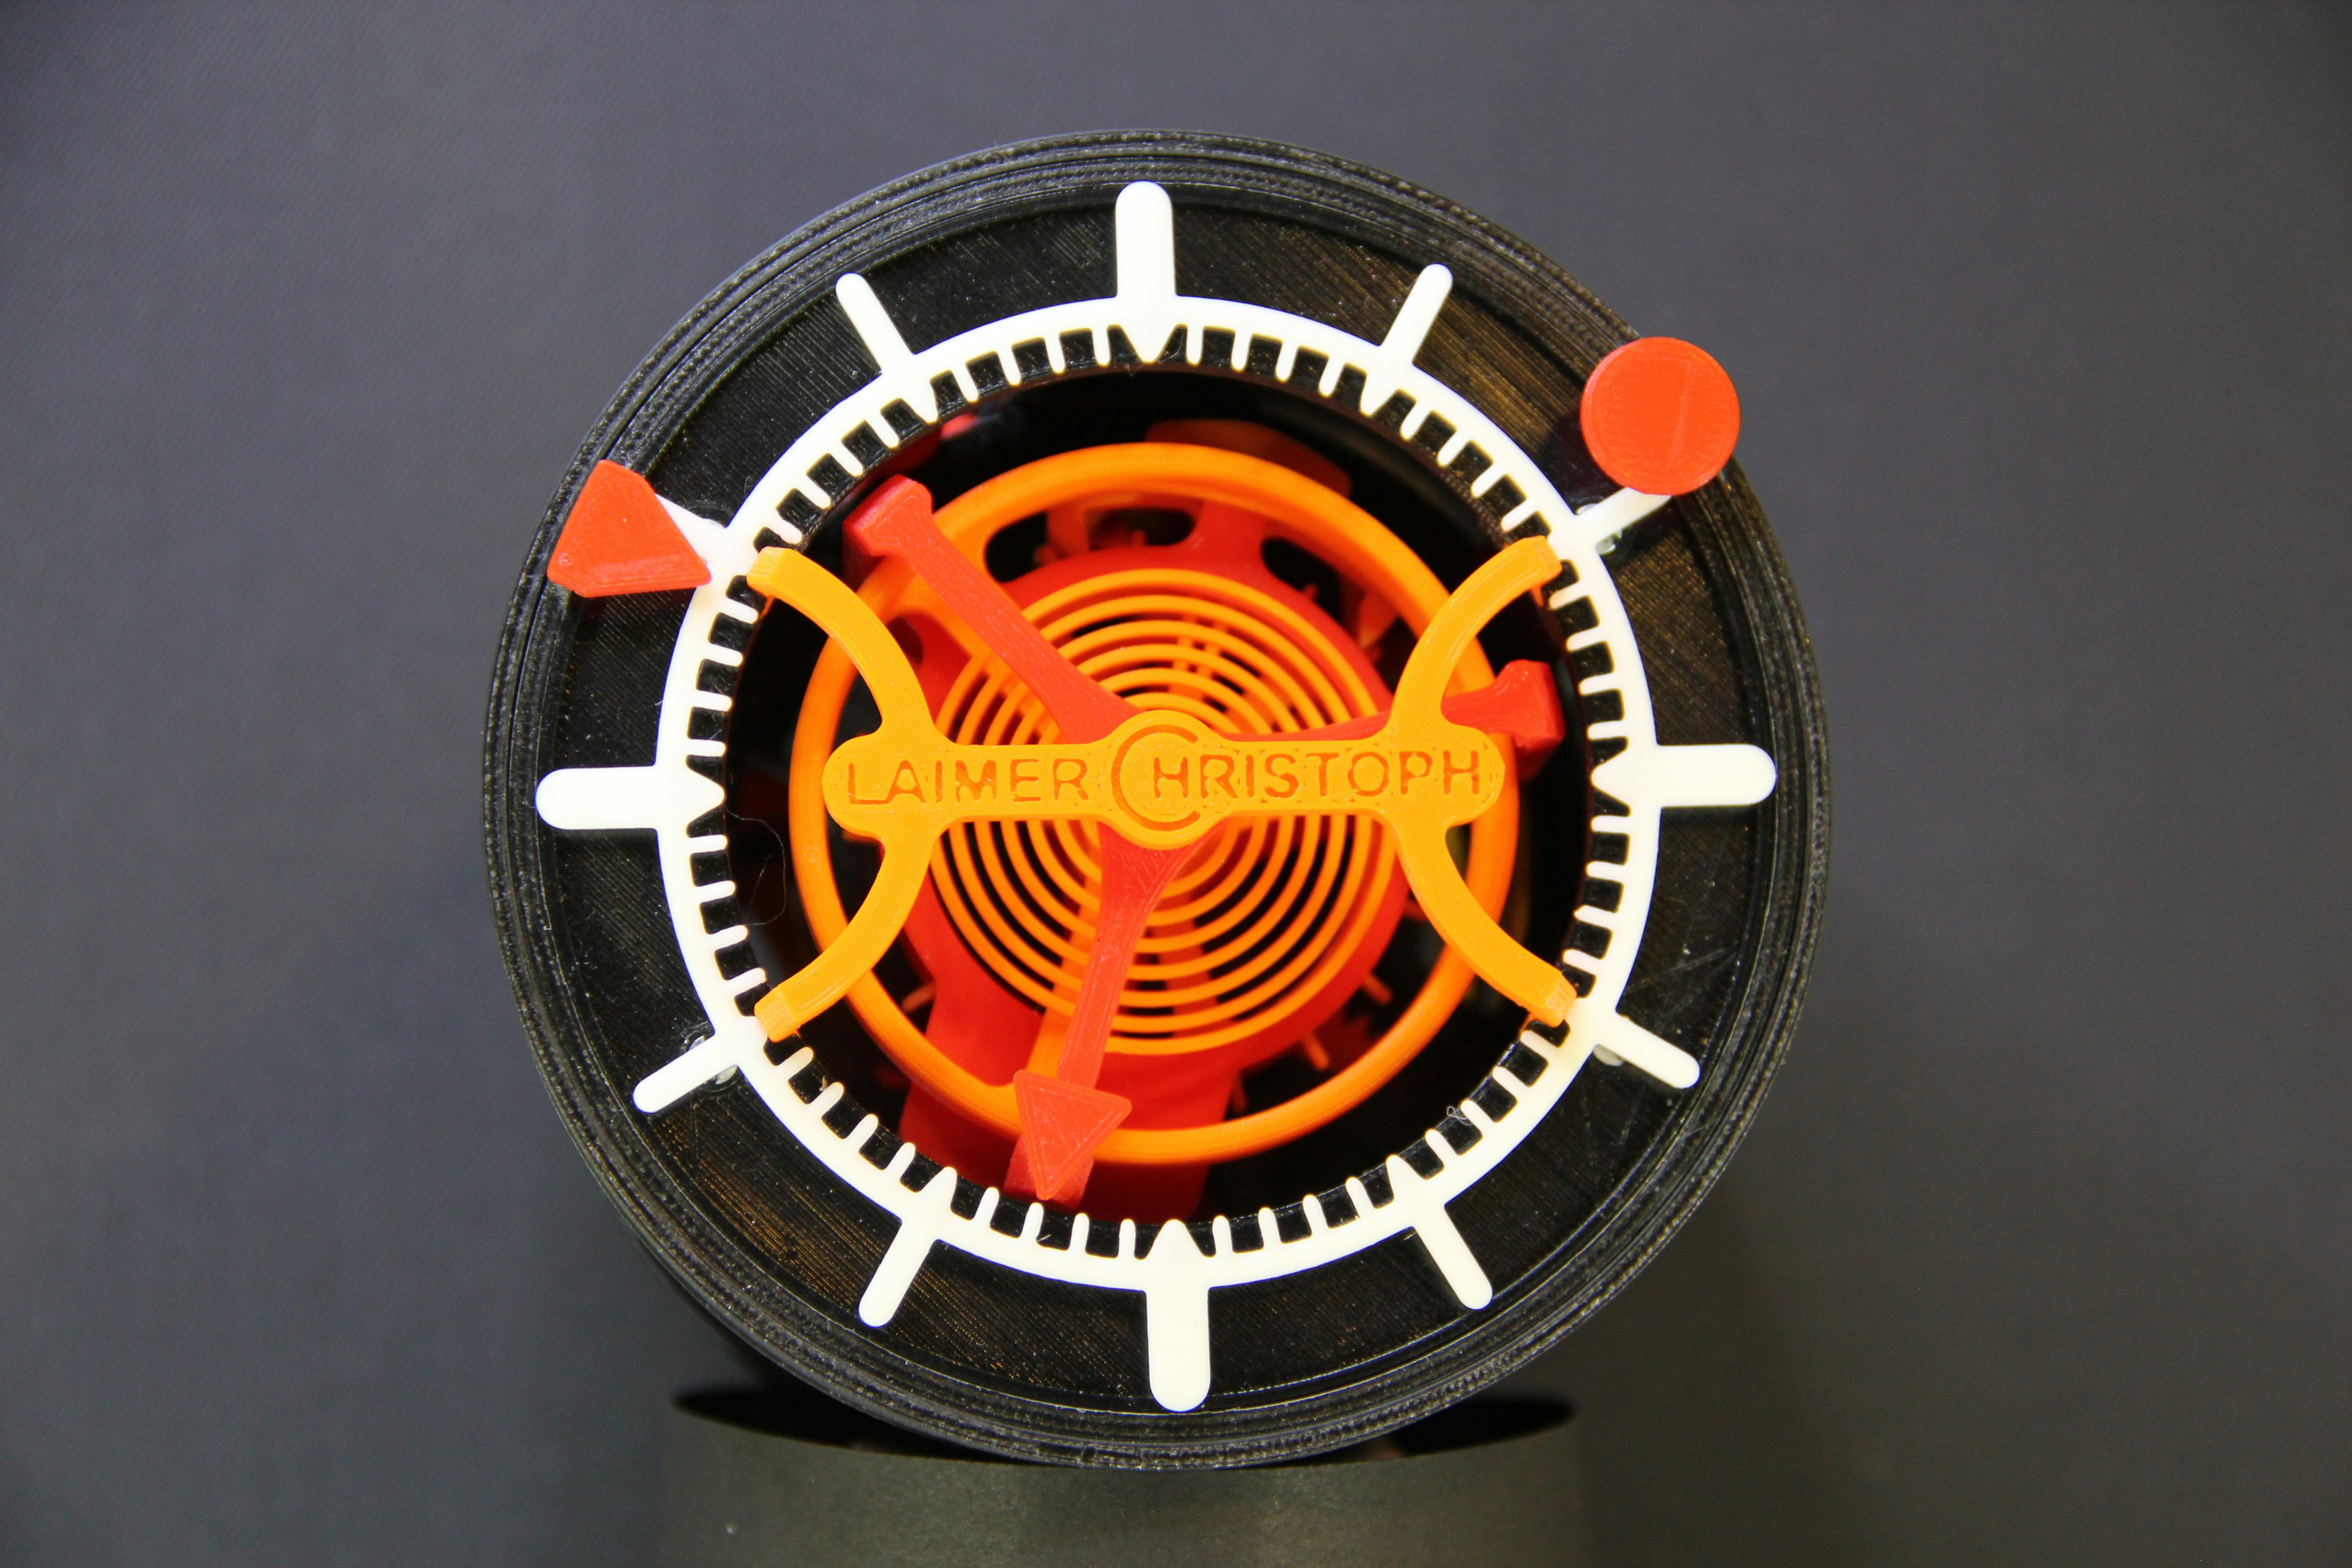 Introducing: The World's Fully Functional 3D Printed Watch: Christoph Laimer Tourbillon -